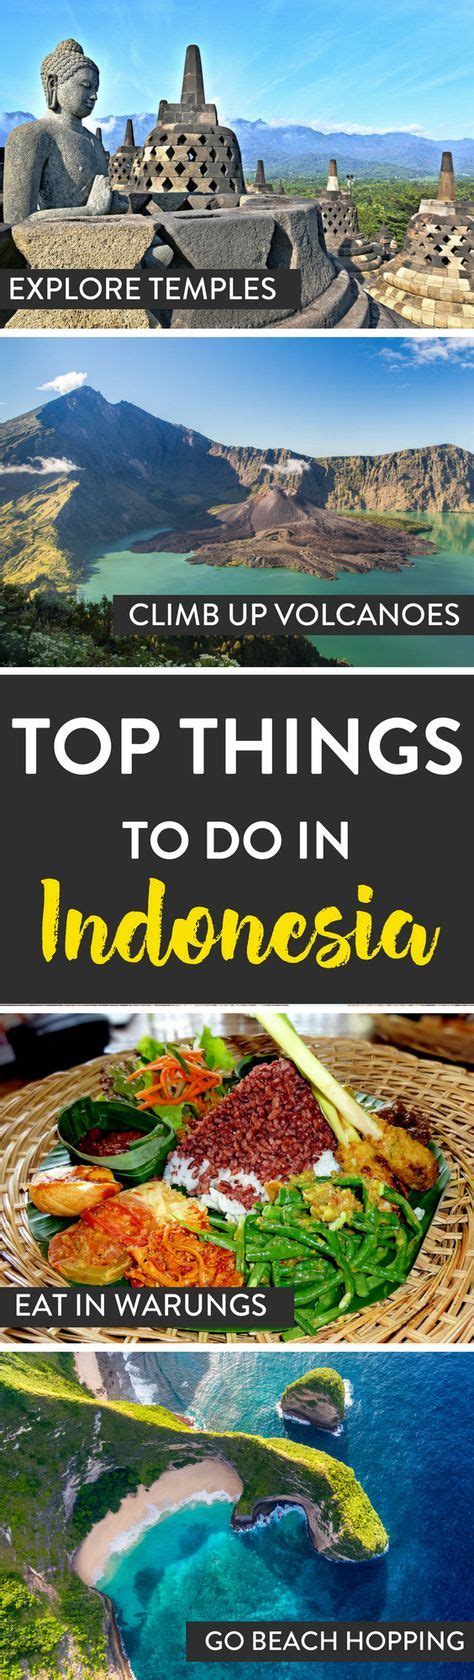 Top Things To Do In Indonesia Not To Be Missed Travel Destinations